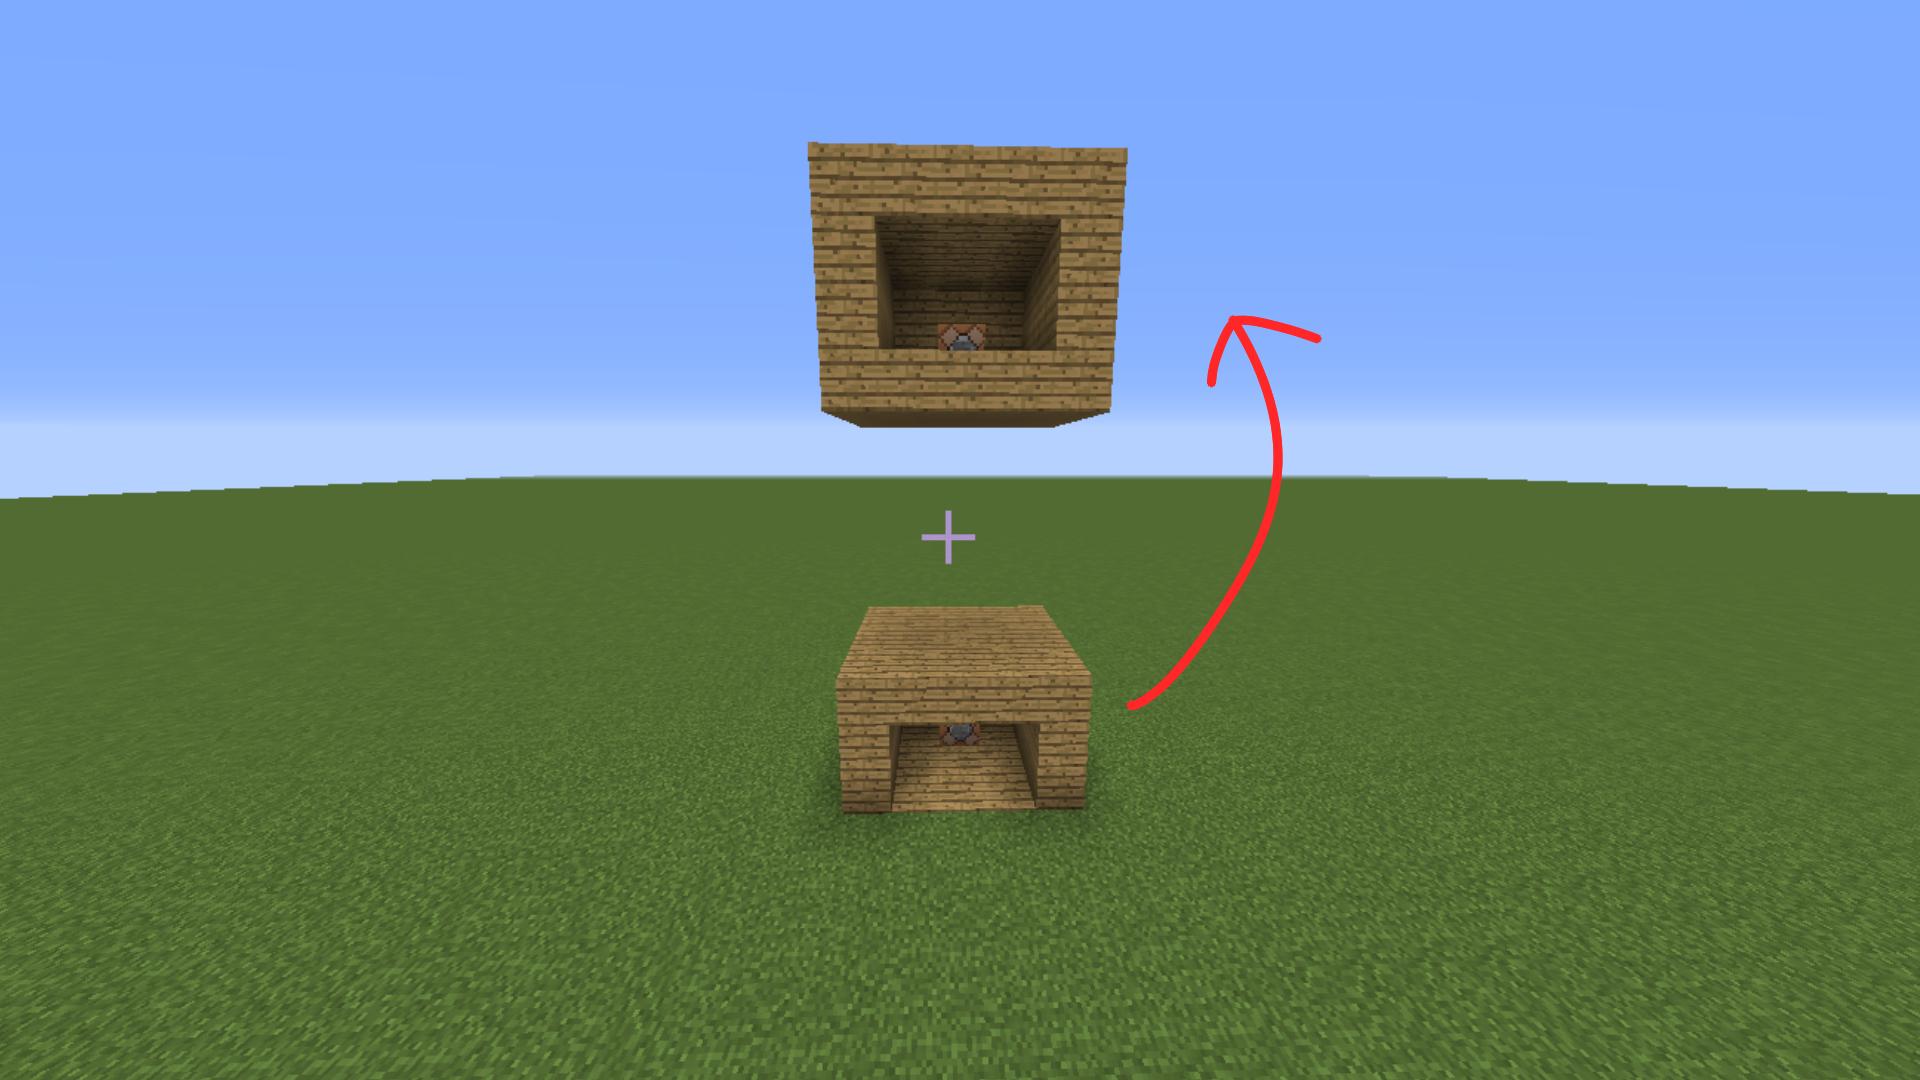 Is there any way in Minecraft to detect who deposited a diamond into a chest using command blocks?